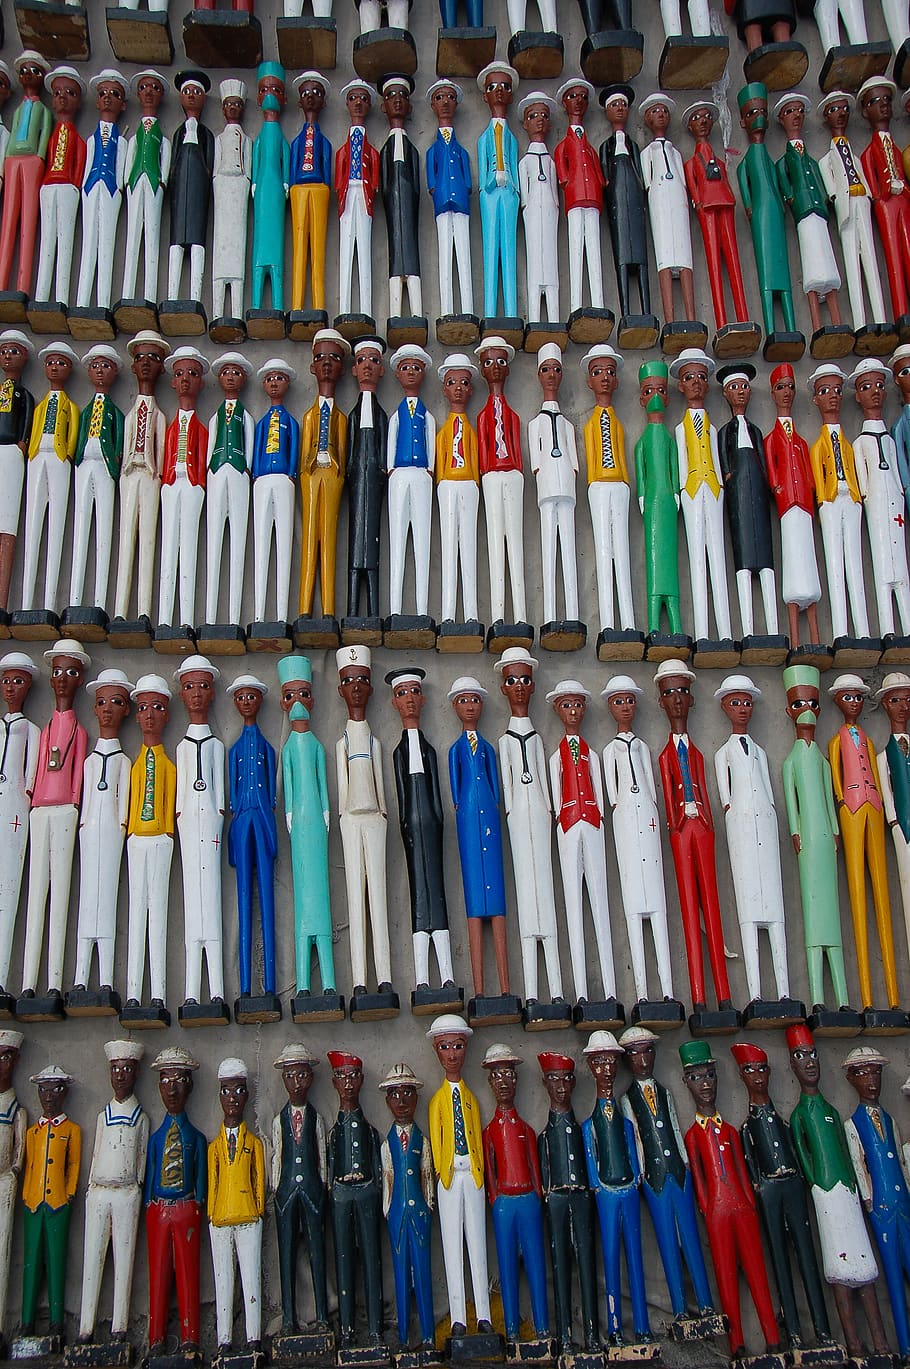 south africa, cape town, men, carved figures, occupations, multi colored